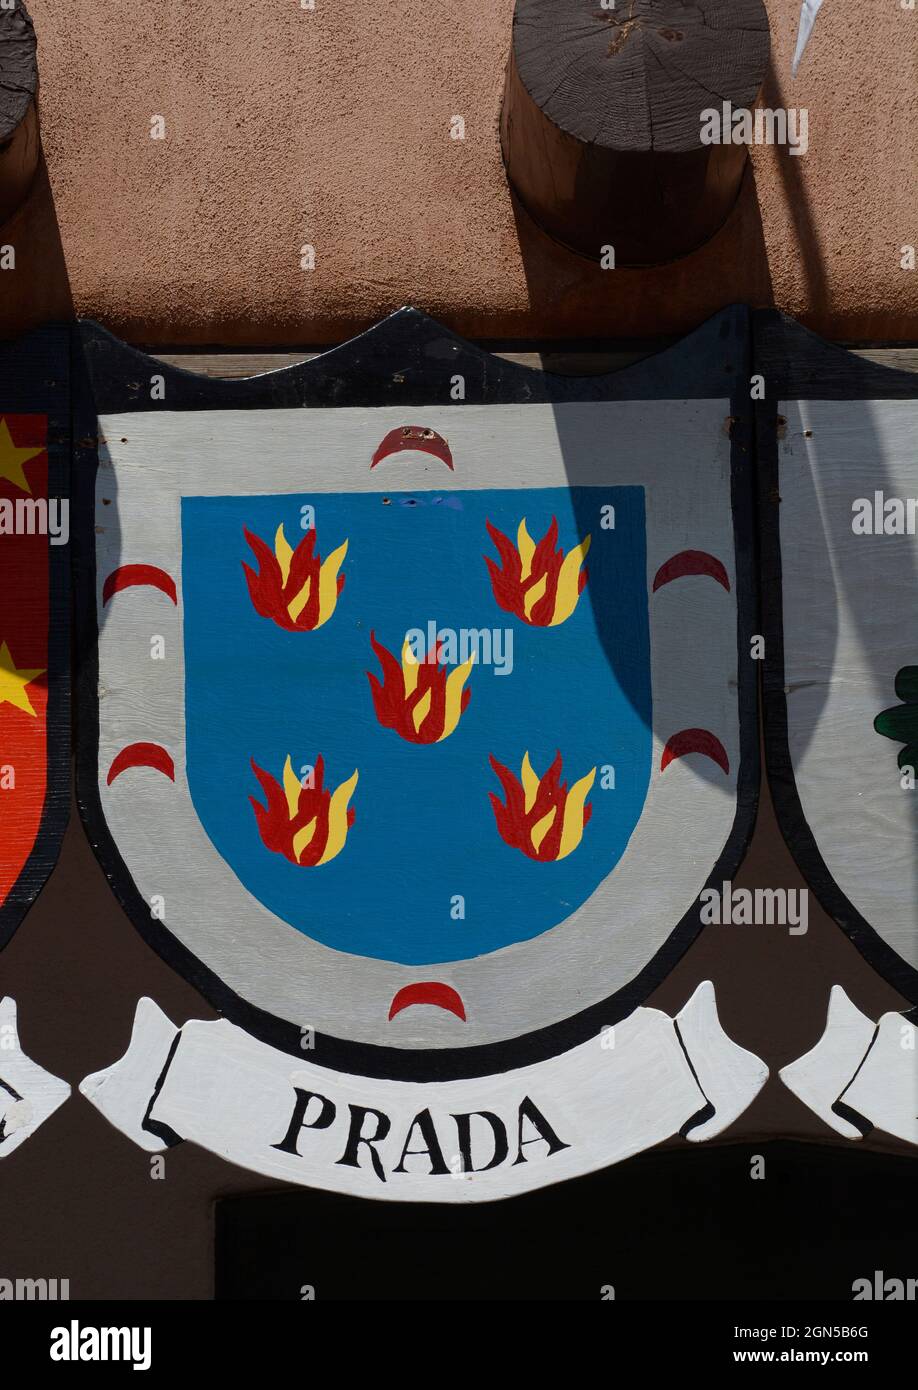 Spanish family coats of arms and surnames displayed on the 17th century  Palace of the Governors during the annual Fiesta de Santa Fe in New Mexico  Stock Photo - Alamy